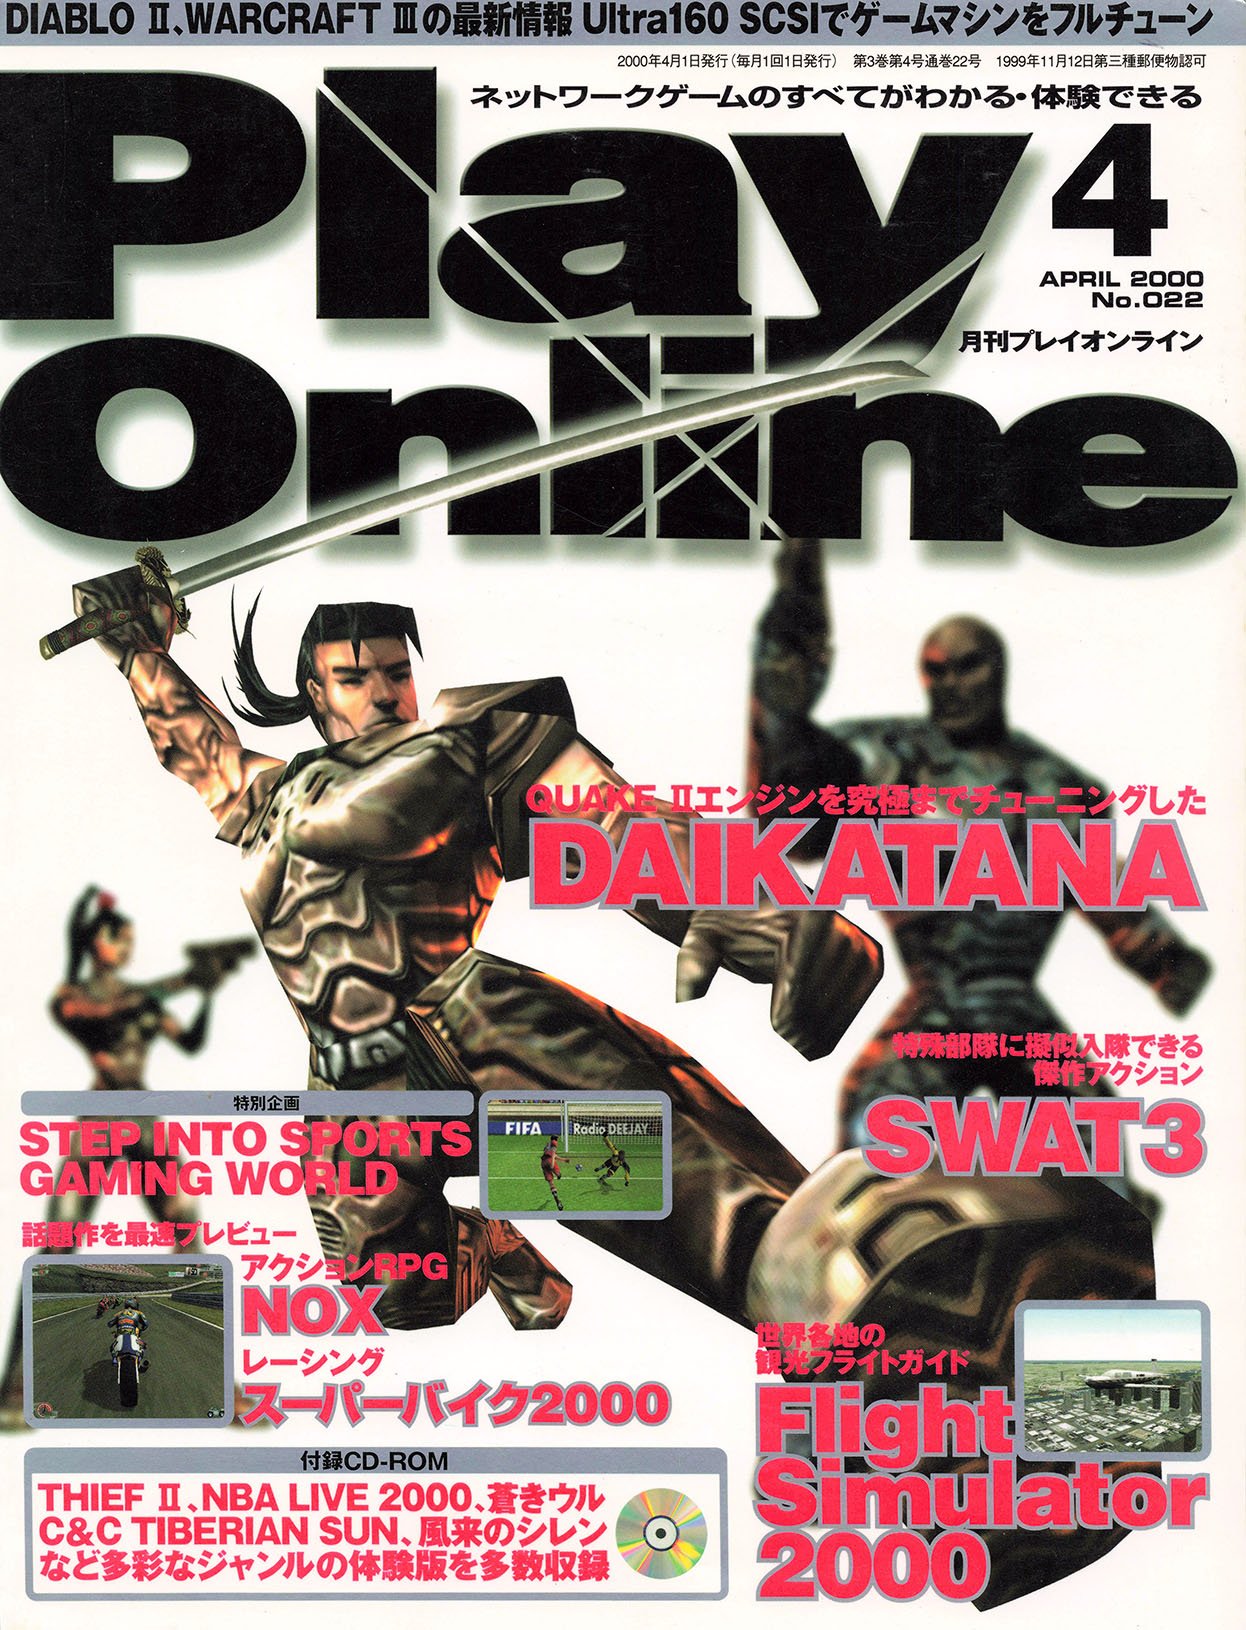 More information about "Play Online No.022 (April 2000)"